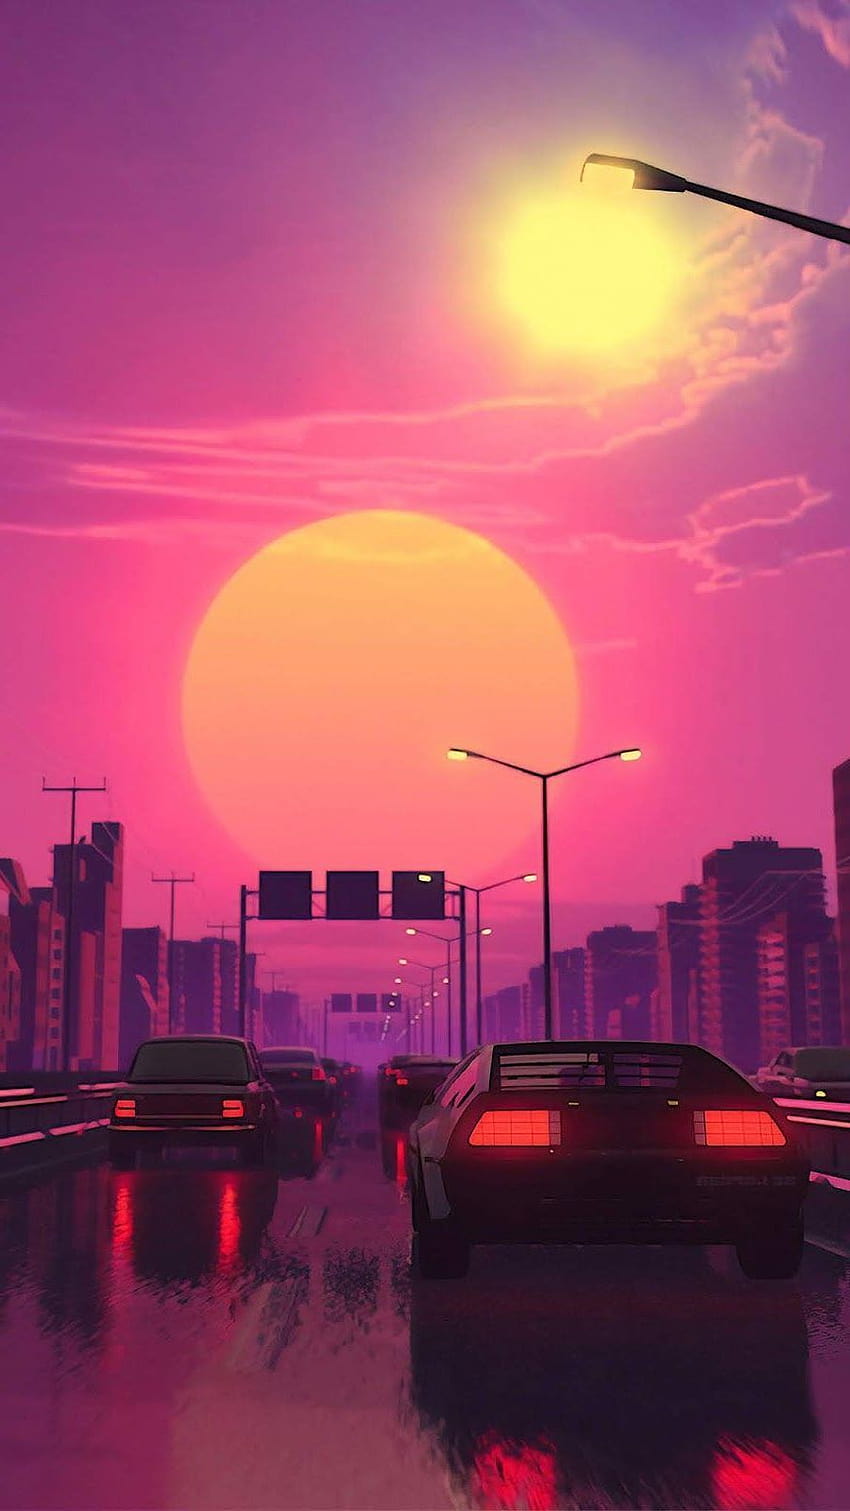 Wallpaper ID 374256  Artistic Retro Wave Phone Wallpaper Planet  Synthwave 1080x2160 free download